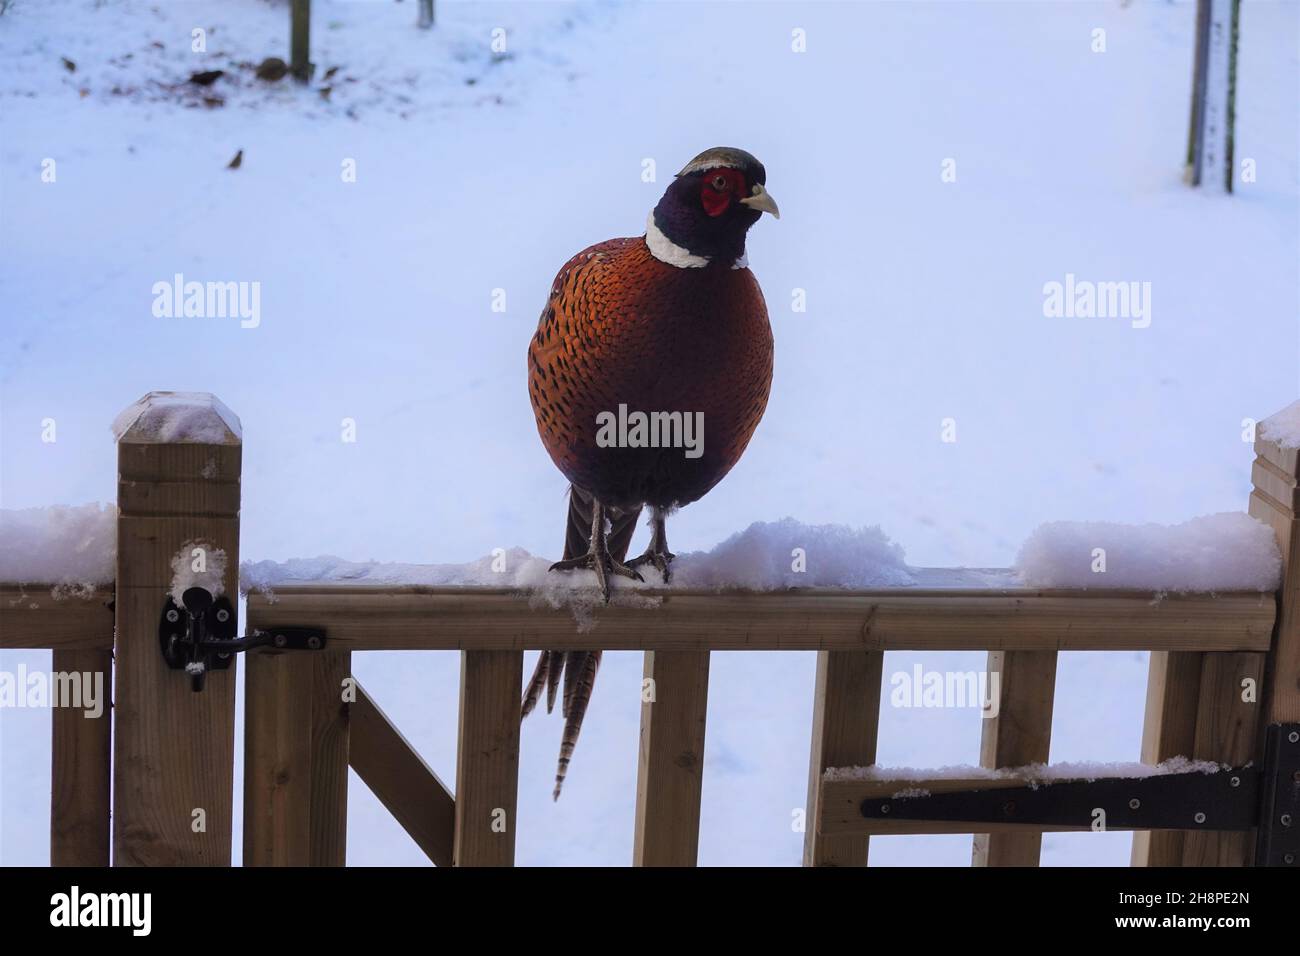 Male pheasant (phasianus colchicus) with its beautiful plumage against white snowy background Stock Photo